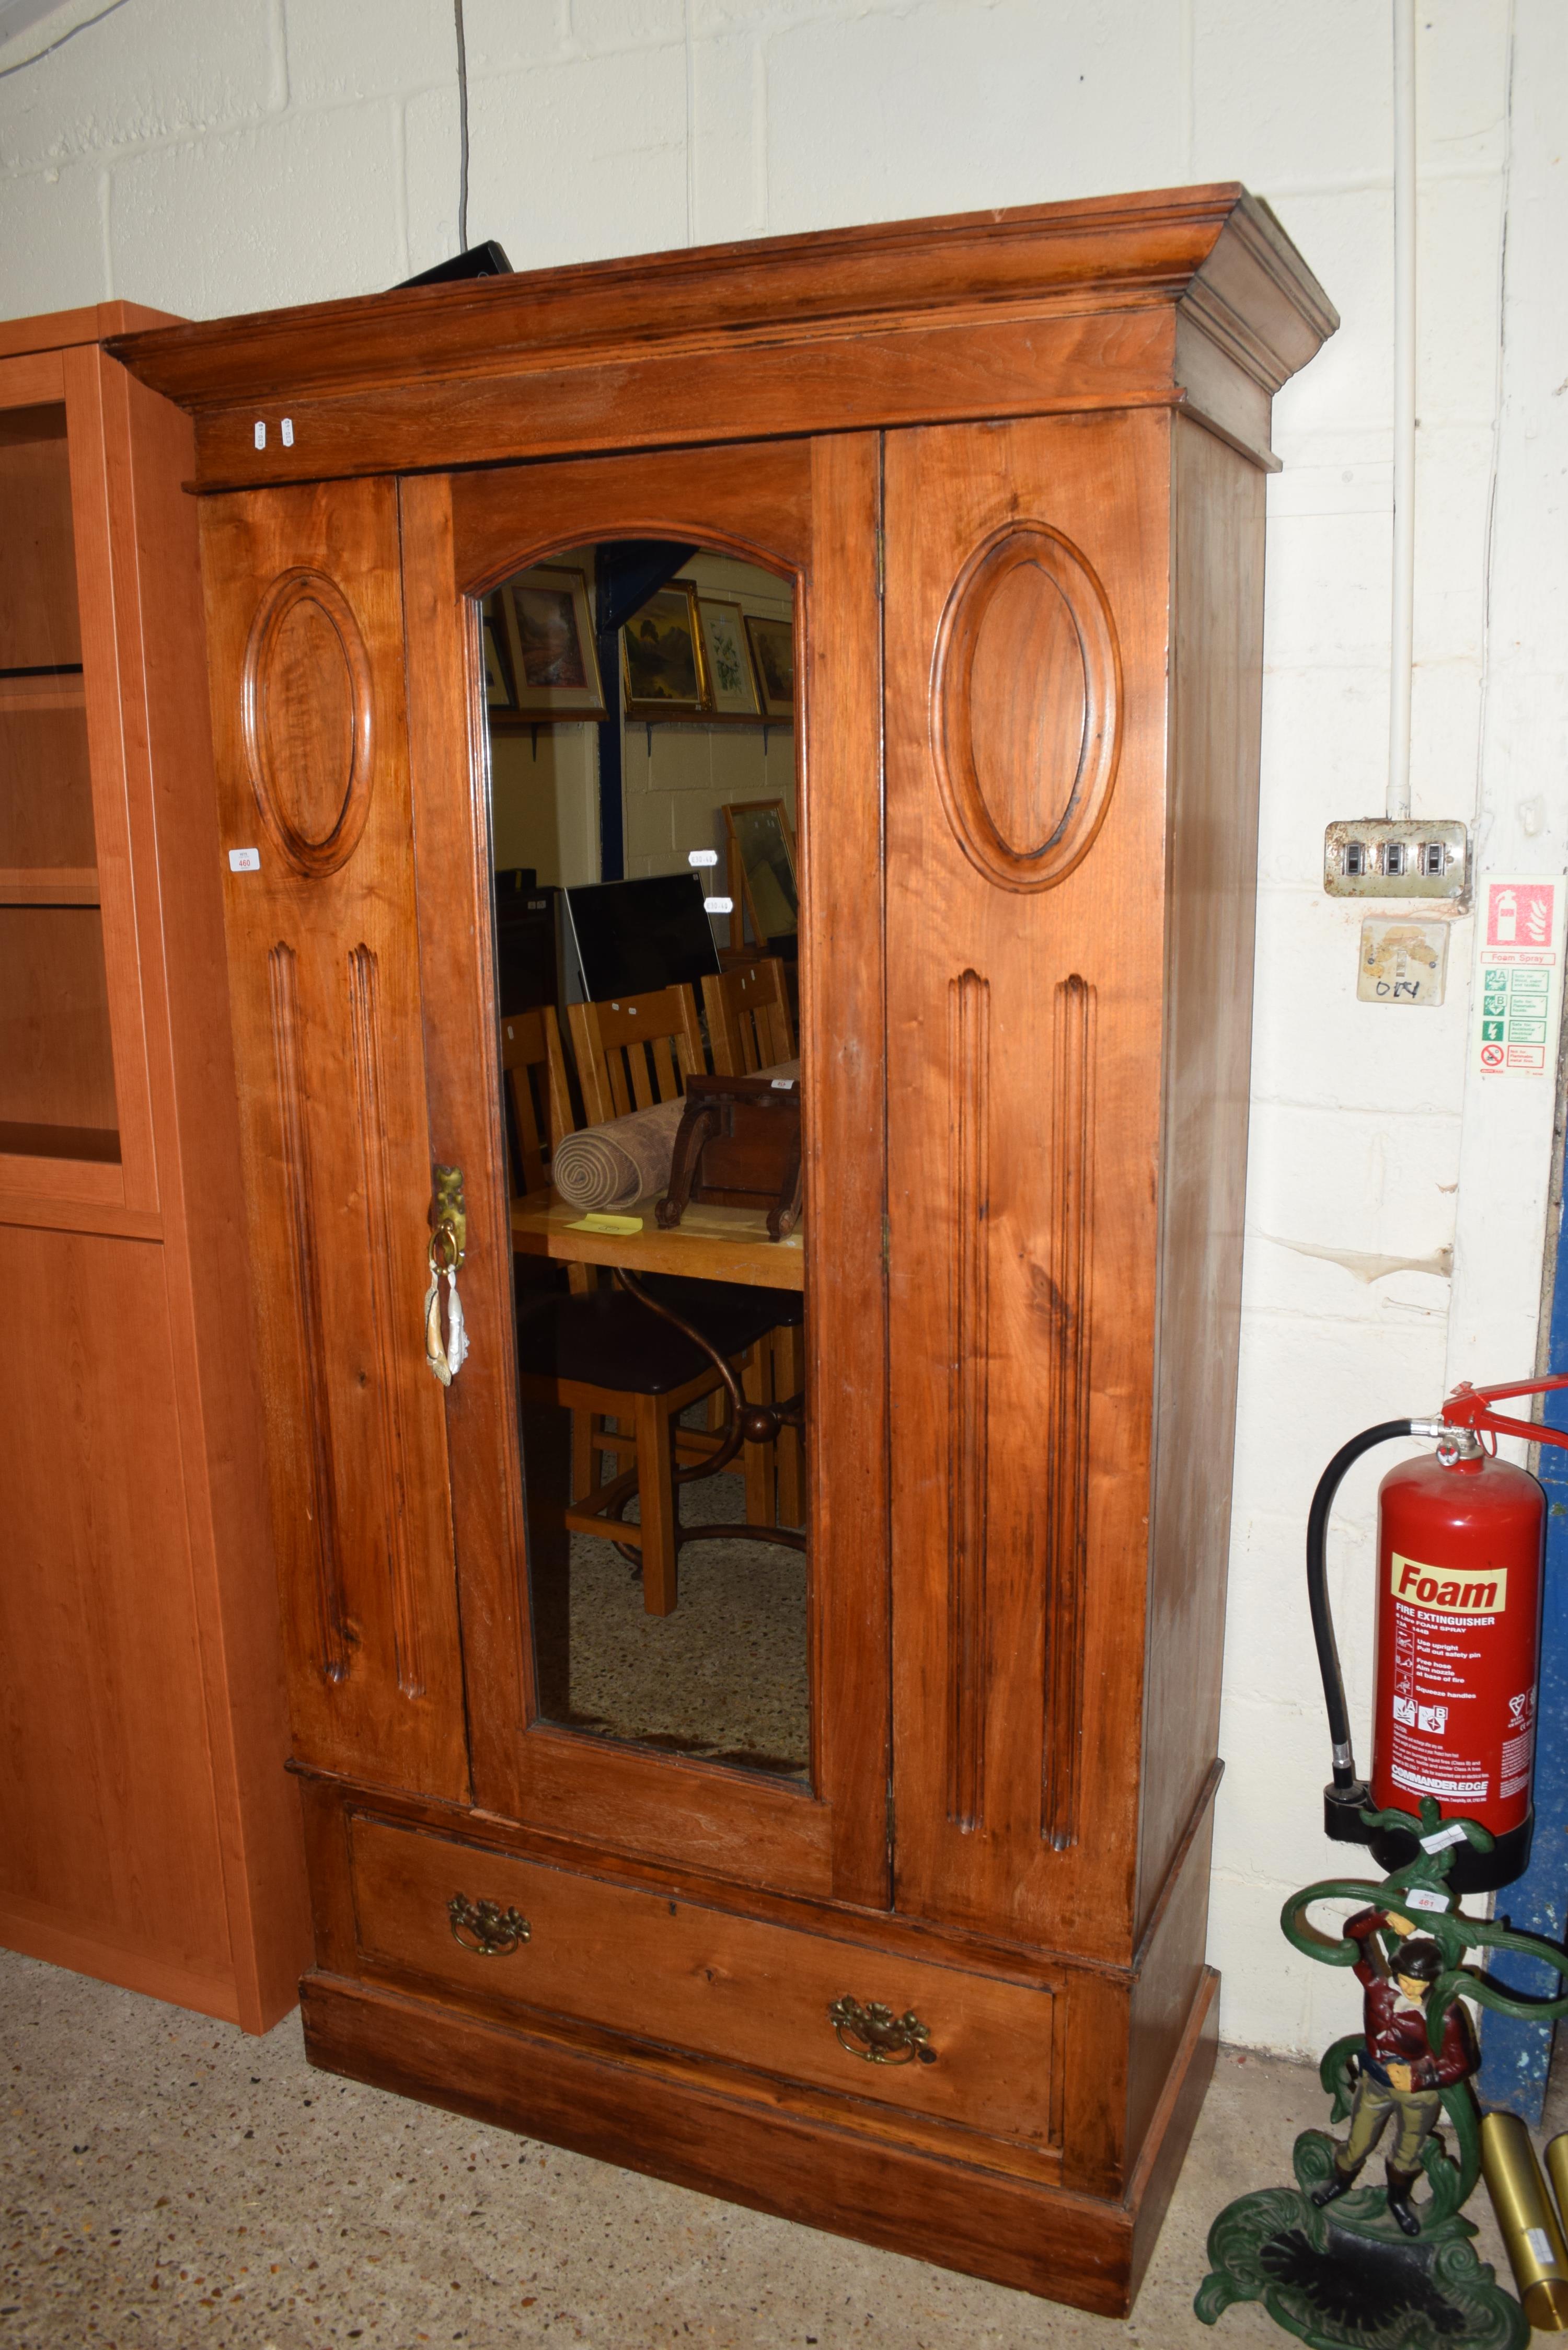 LATE VICTORIAN AMERICAN WALNUT WARDROBE WITH SHAPED CORNICE OVER A SINGLE MIRRORED DOOR AND DRAWER - Image 2 of 2